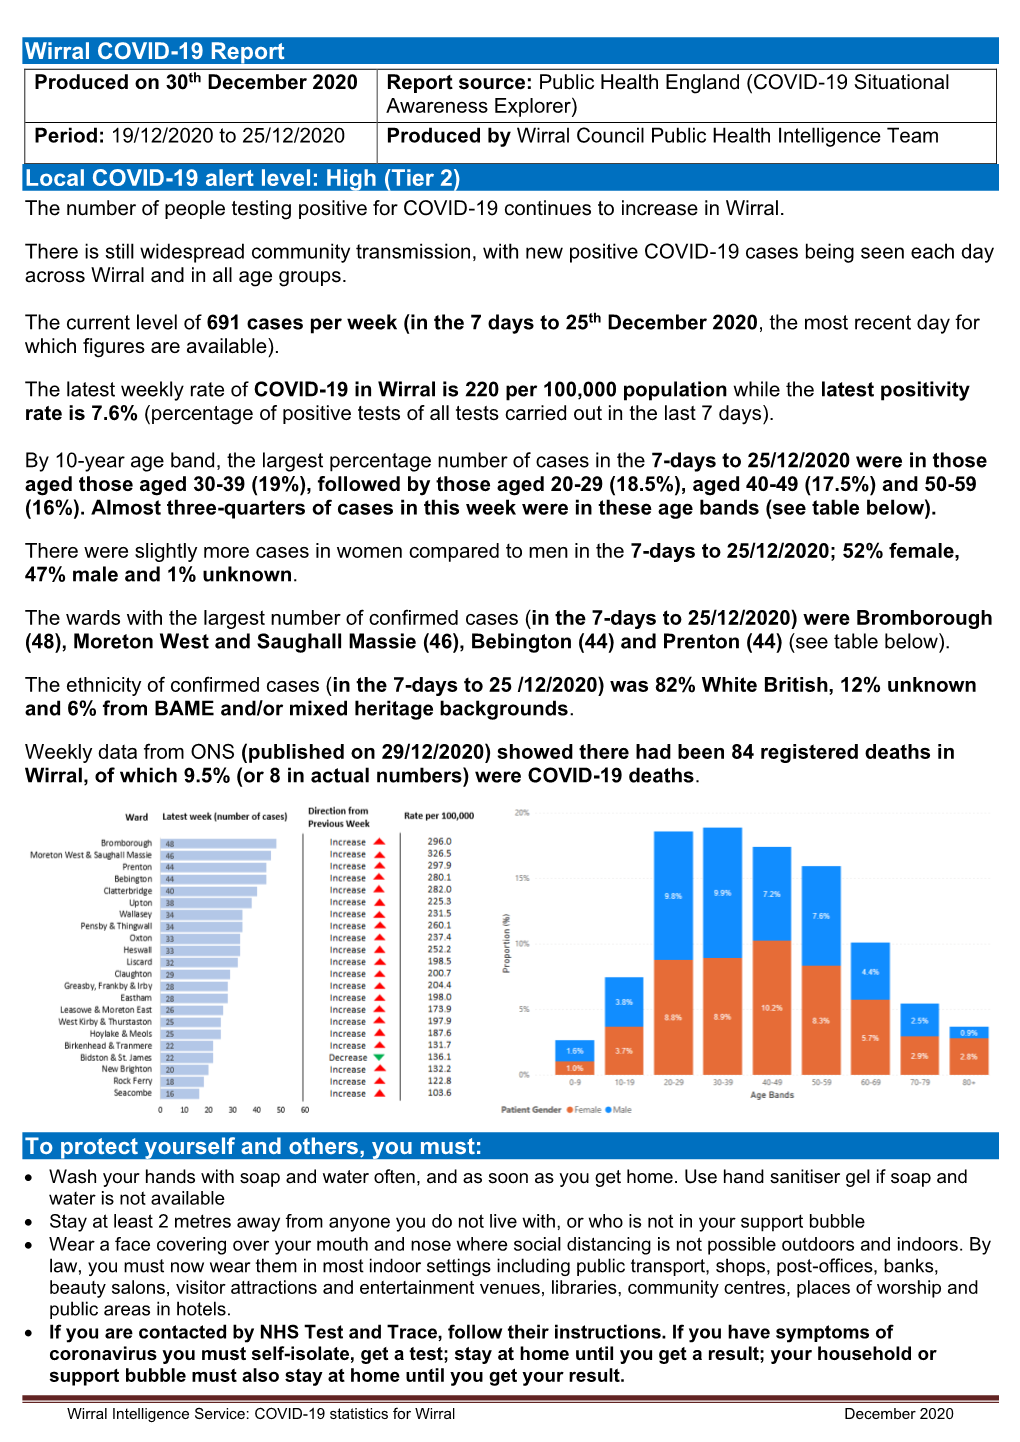 COVID-19 Statistics for Wirral December 2020